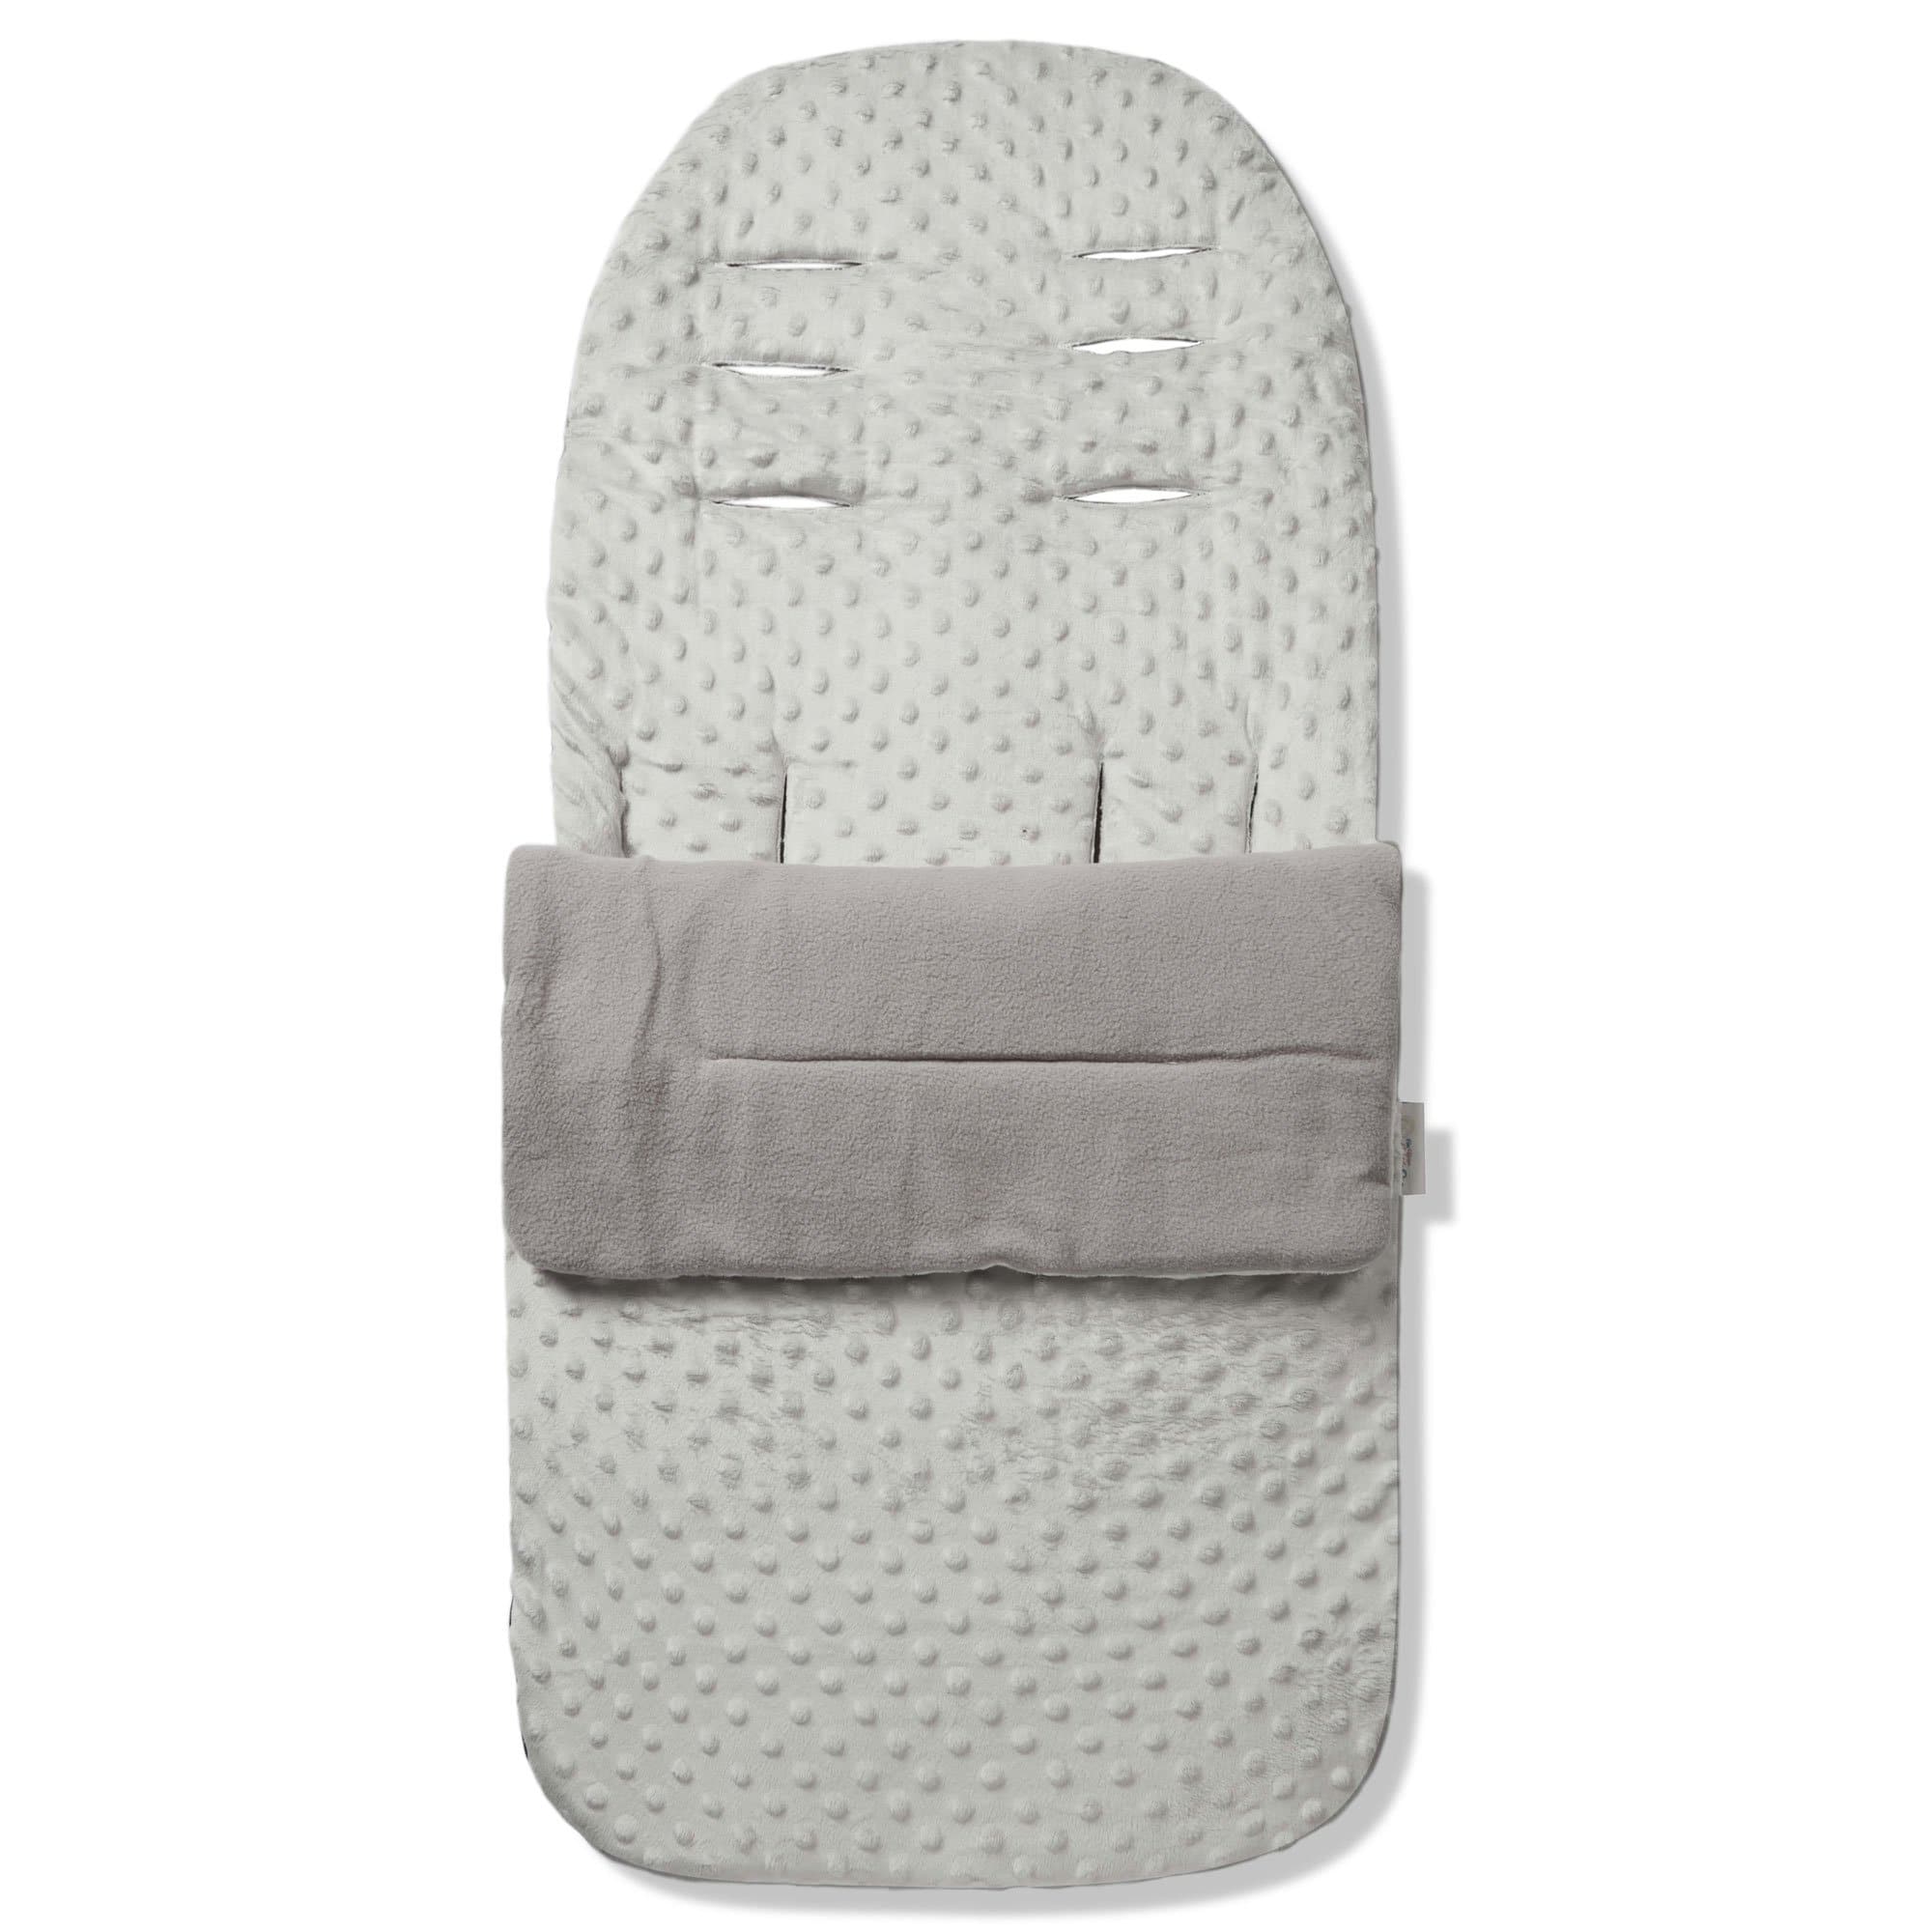 Dimple Footmuff / Cosy Toes Compatible with Joolz - Grey / Fits All Models | For Your Little One